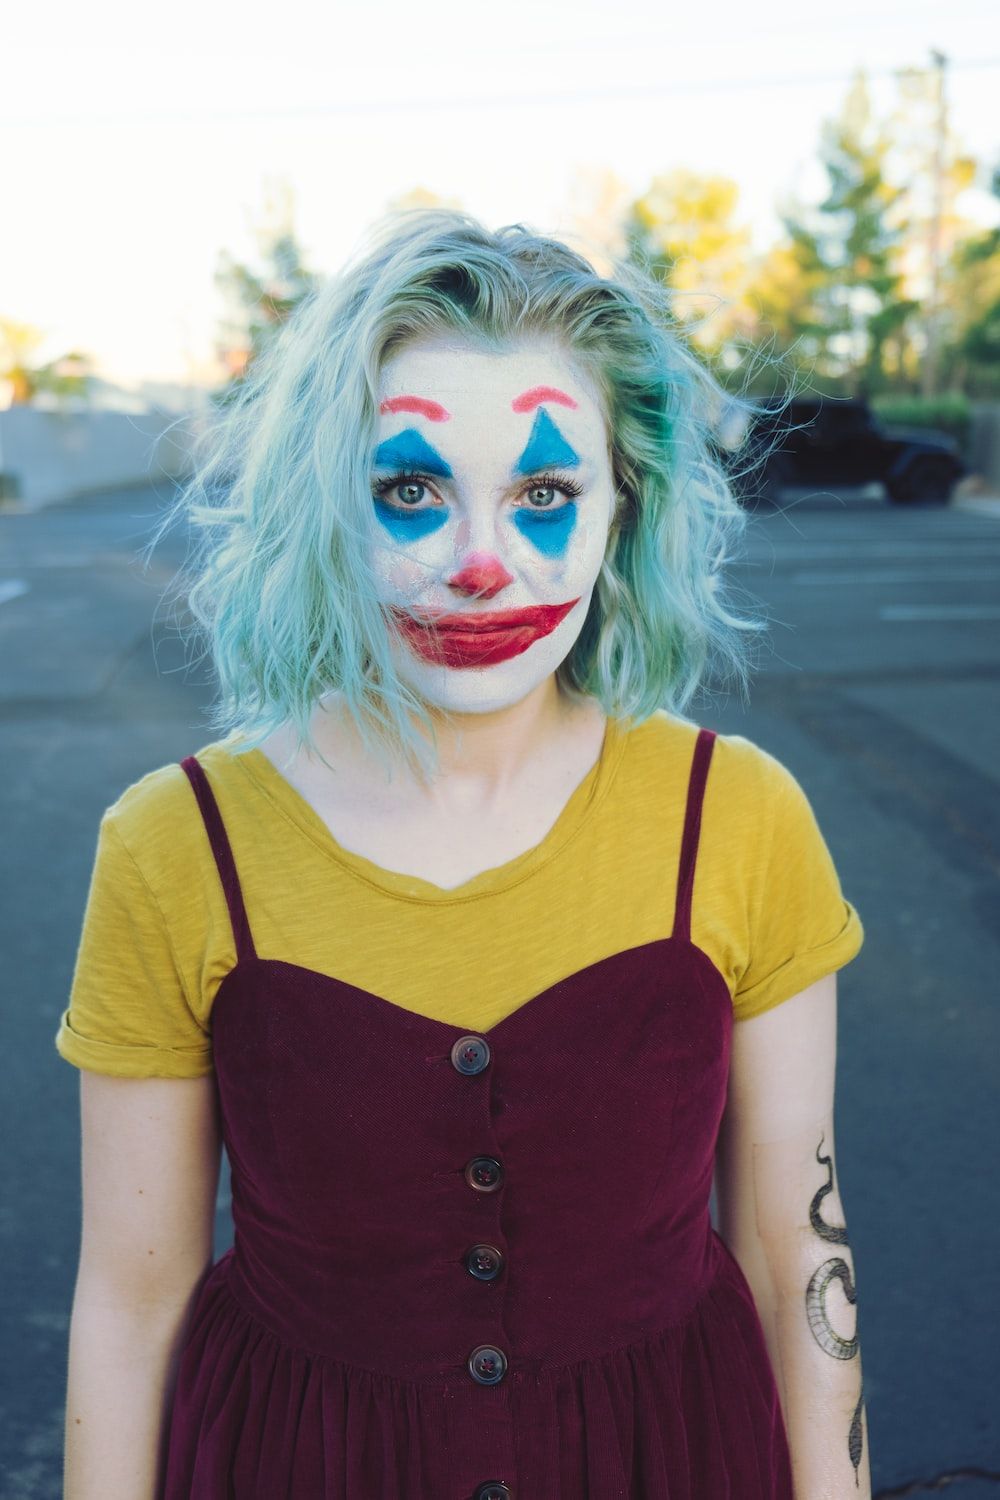 A woman with blue hair and clown makeup - Clown